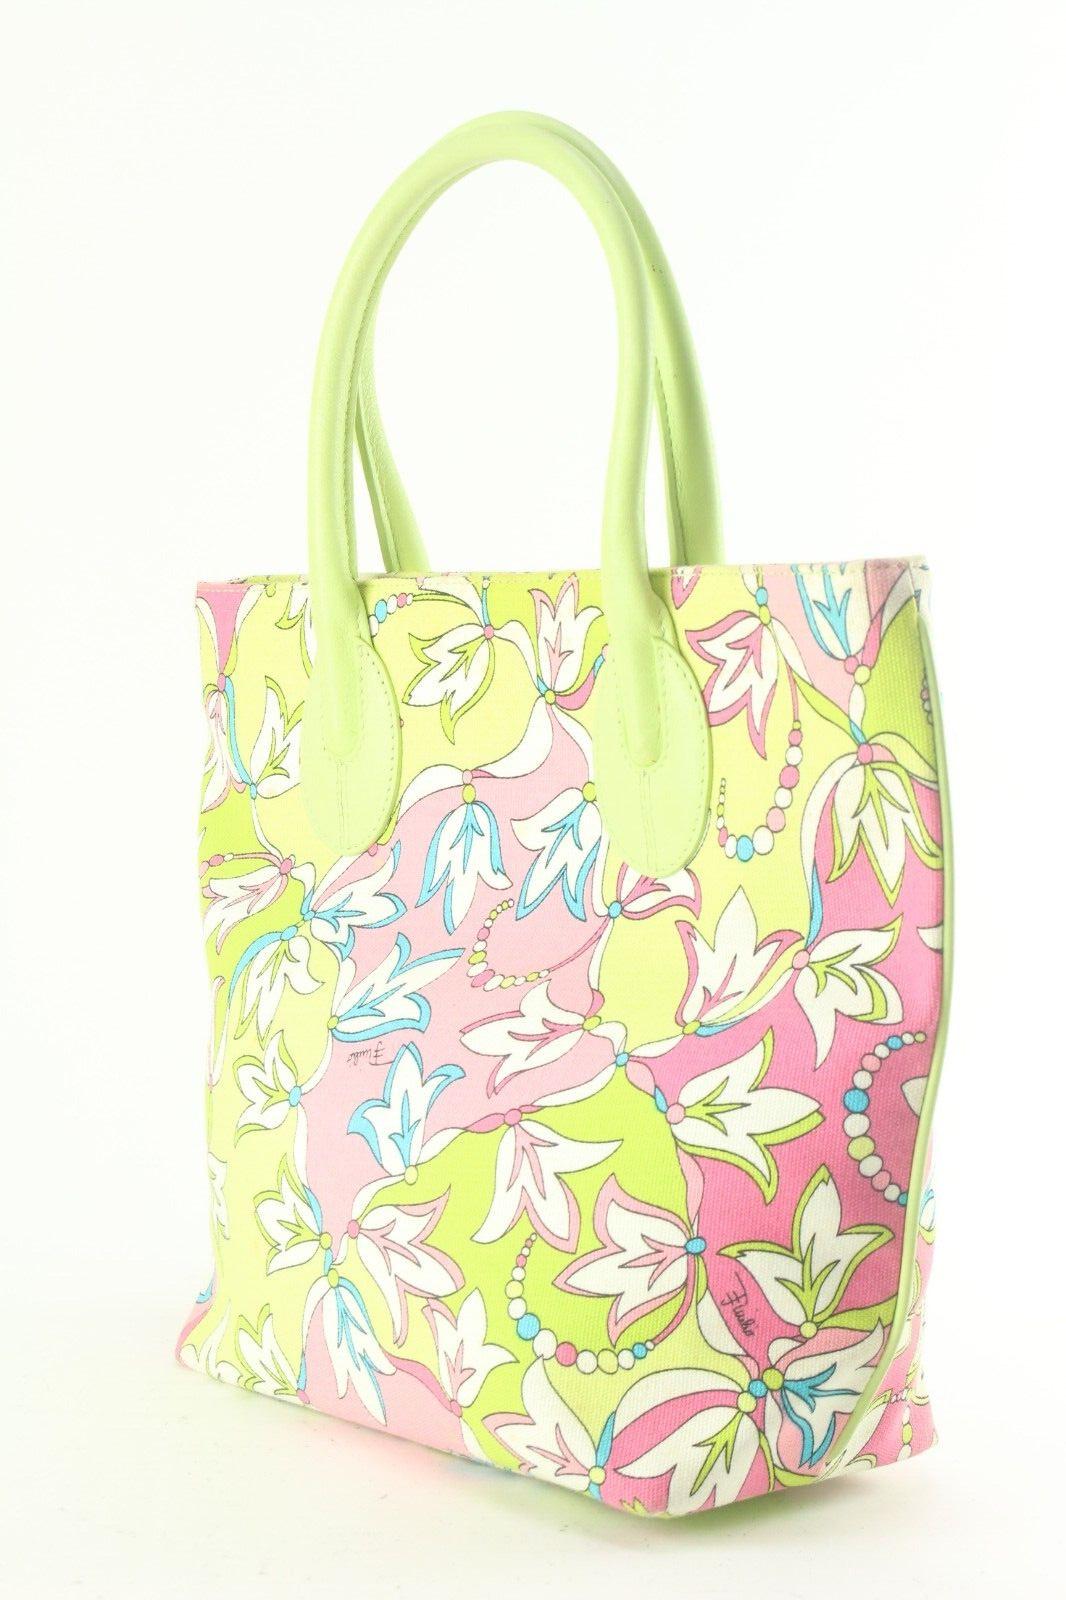 Beige Emilio Pucci Green x Pink Floral Tote 1EP822K For Sale